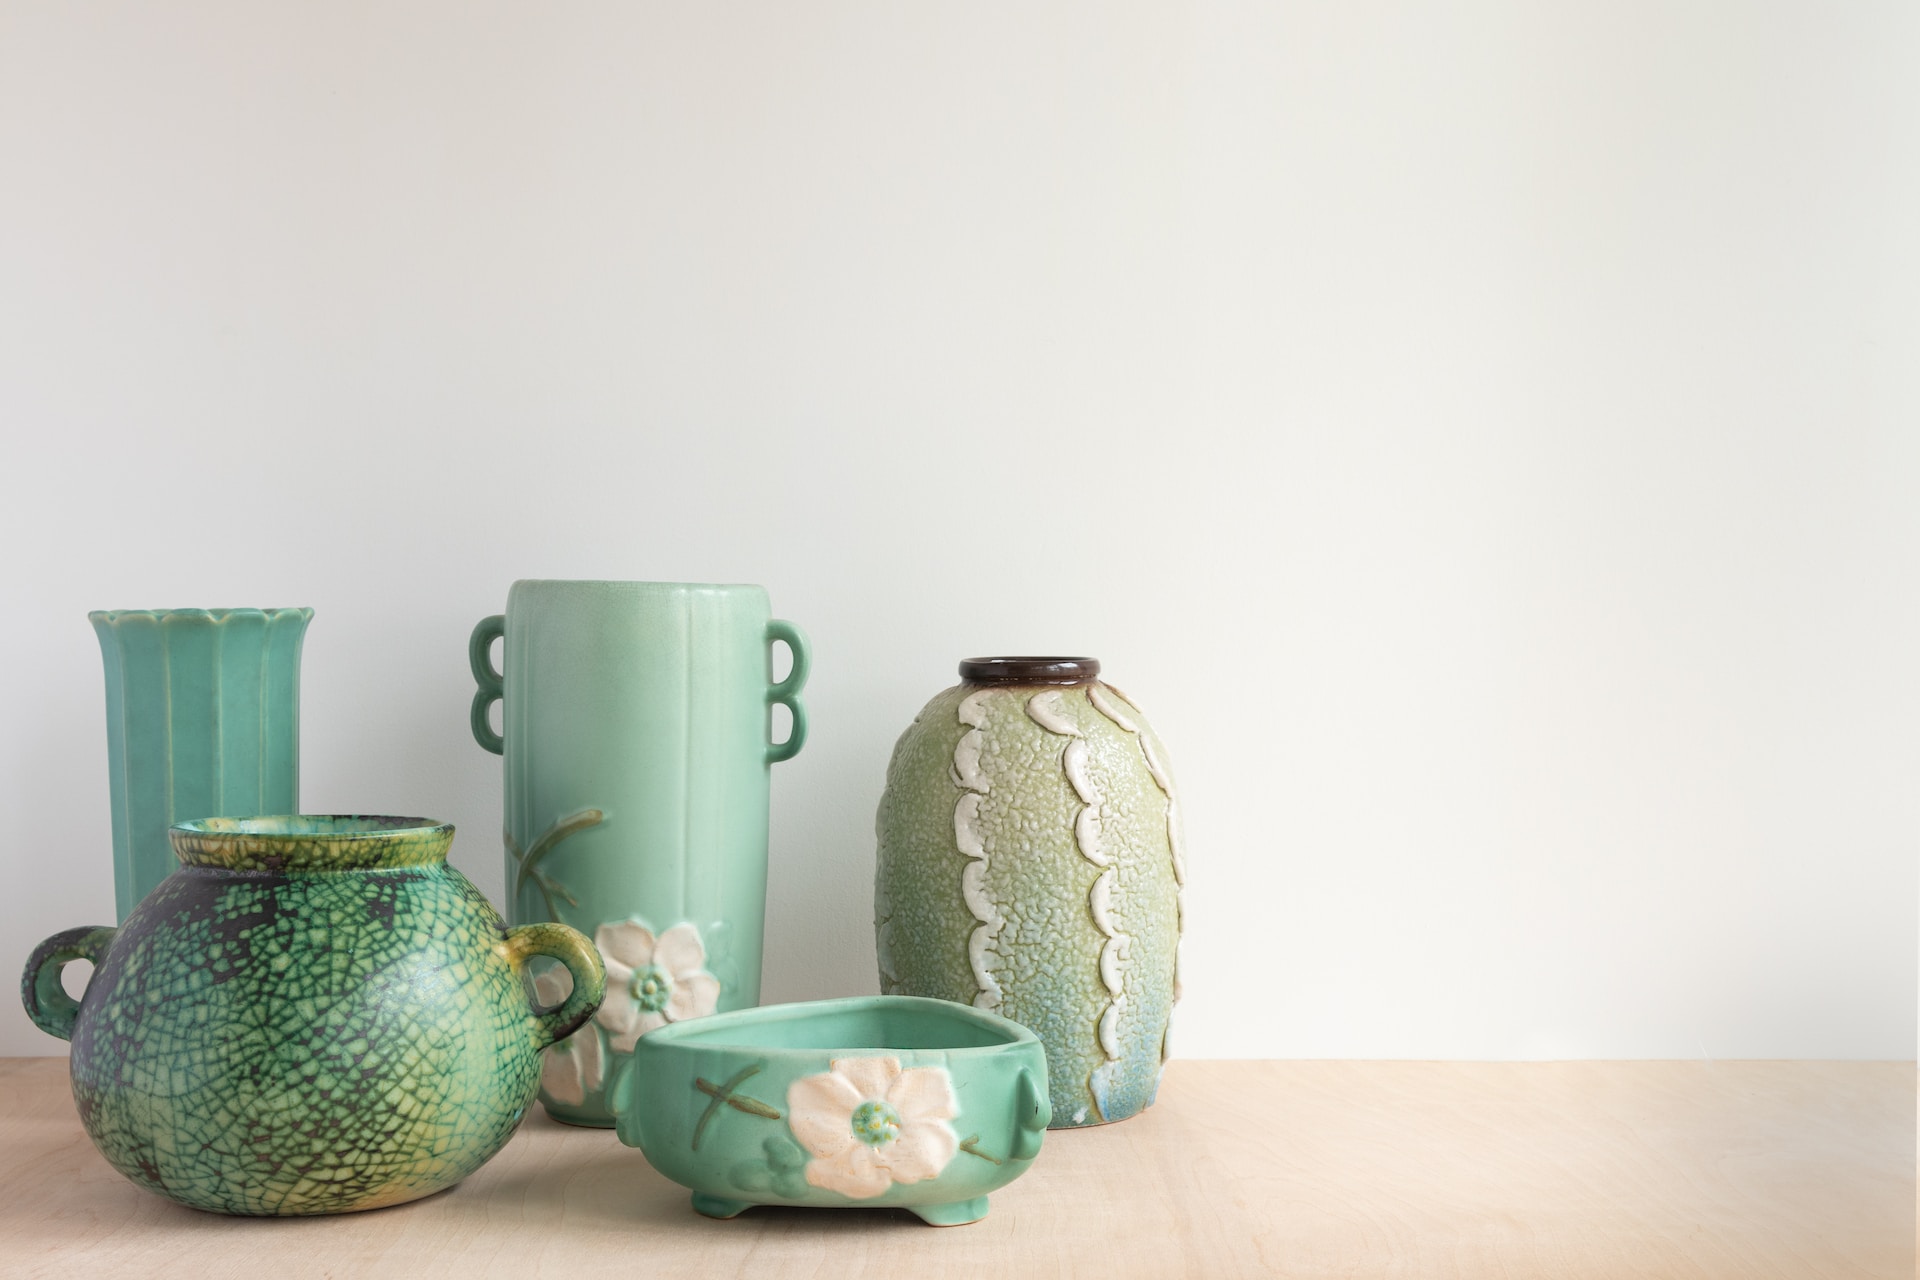 pottery in different shades of green